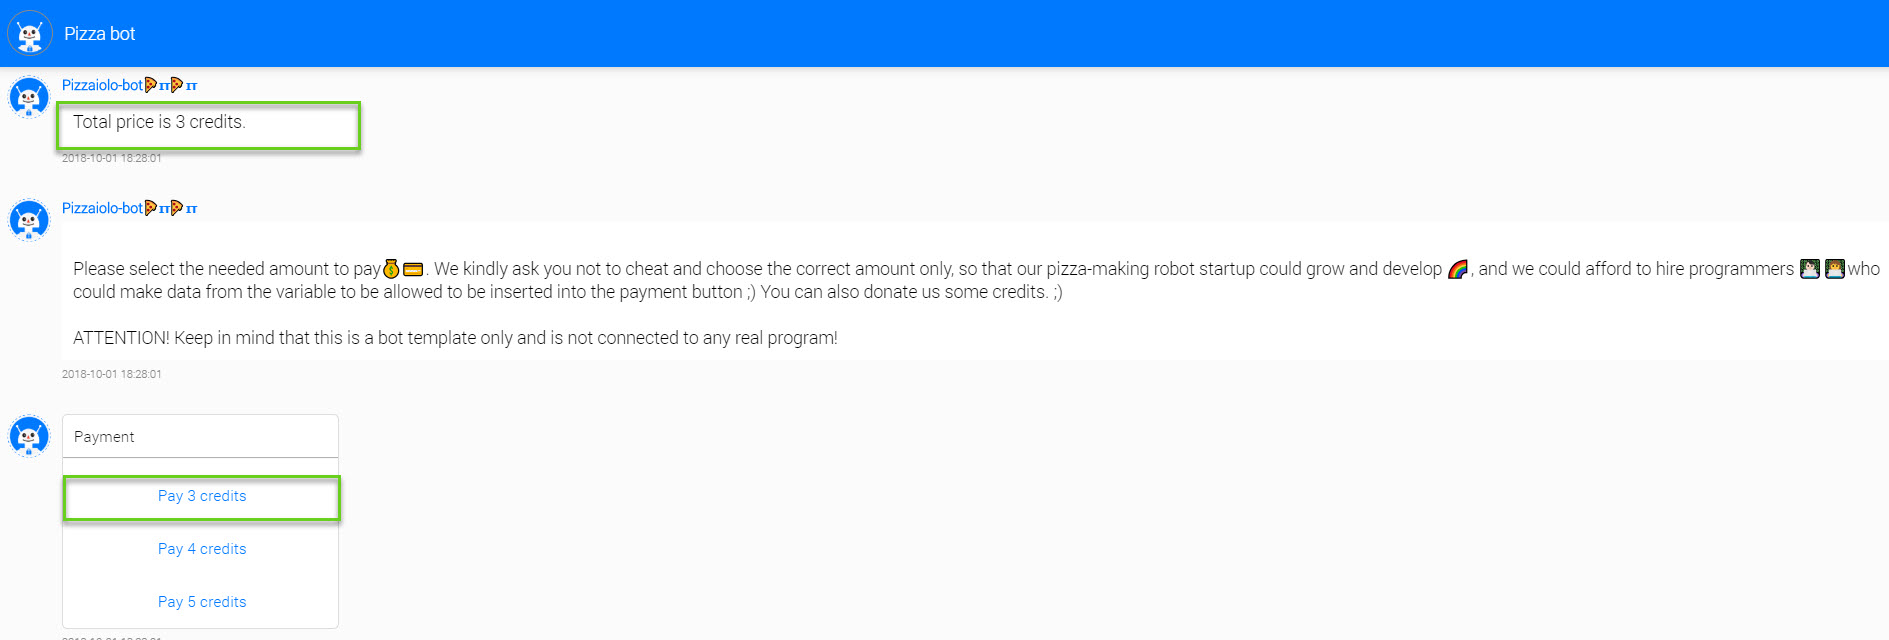 paypal customer service online chat